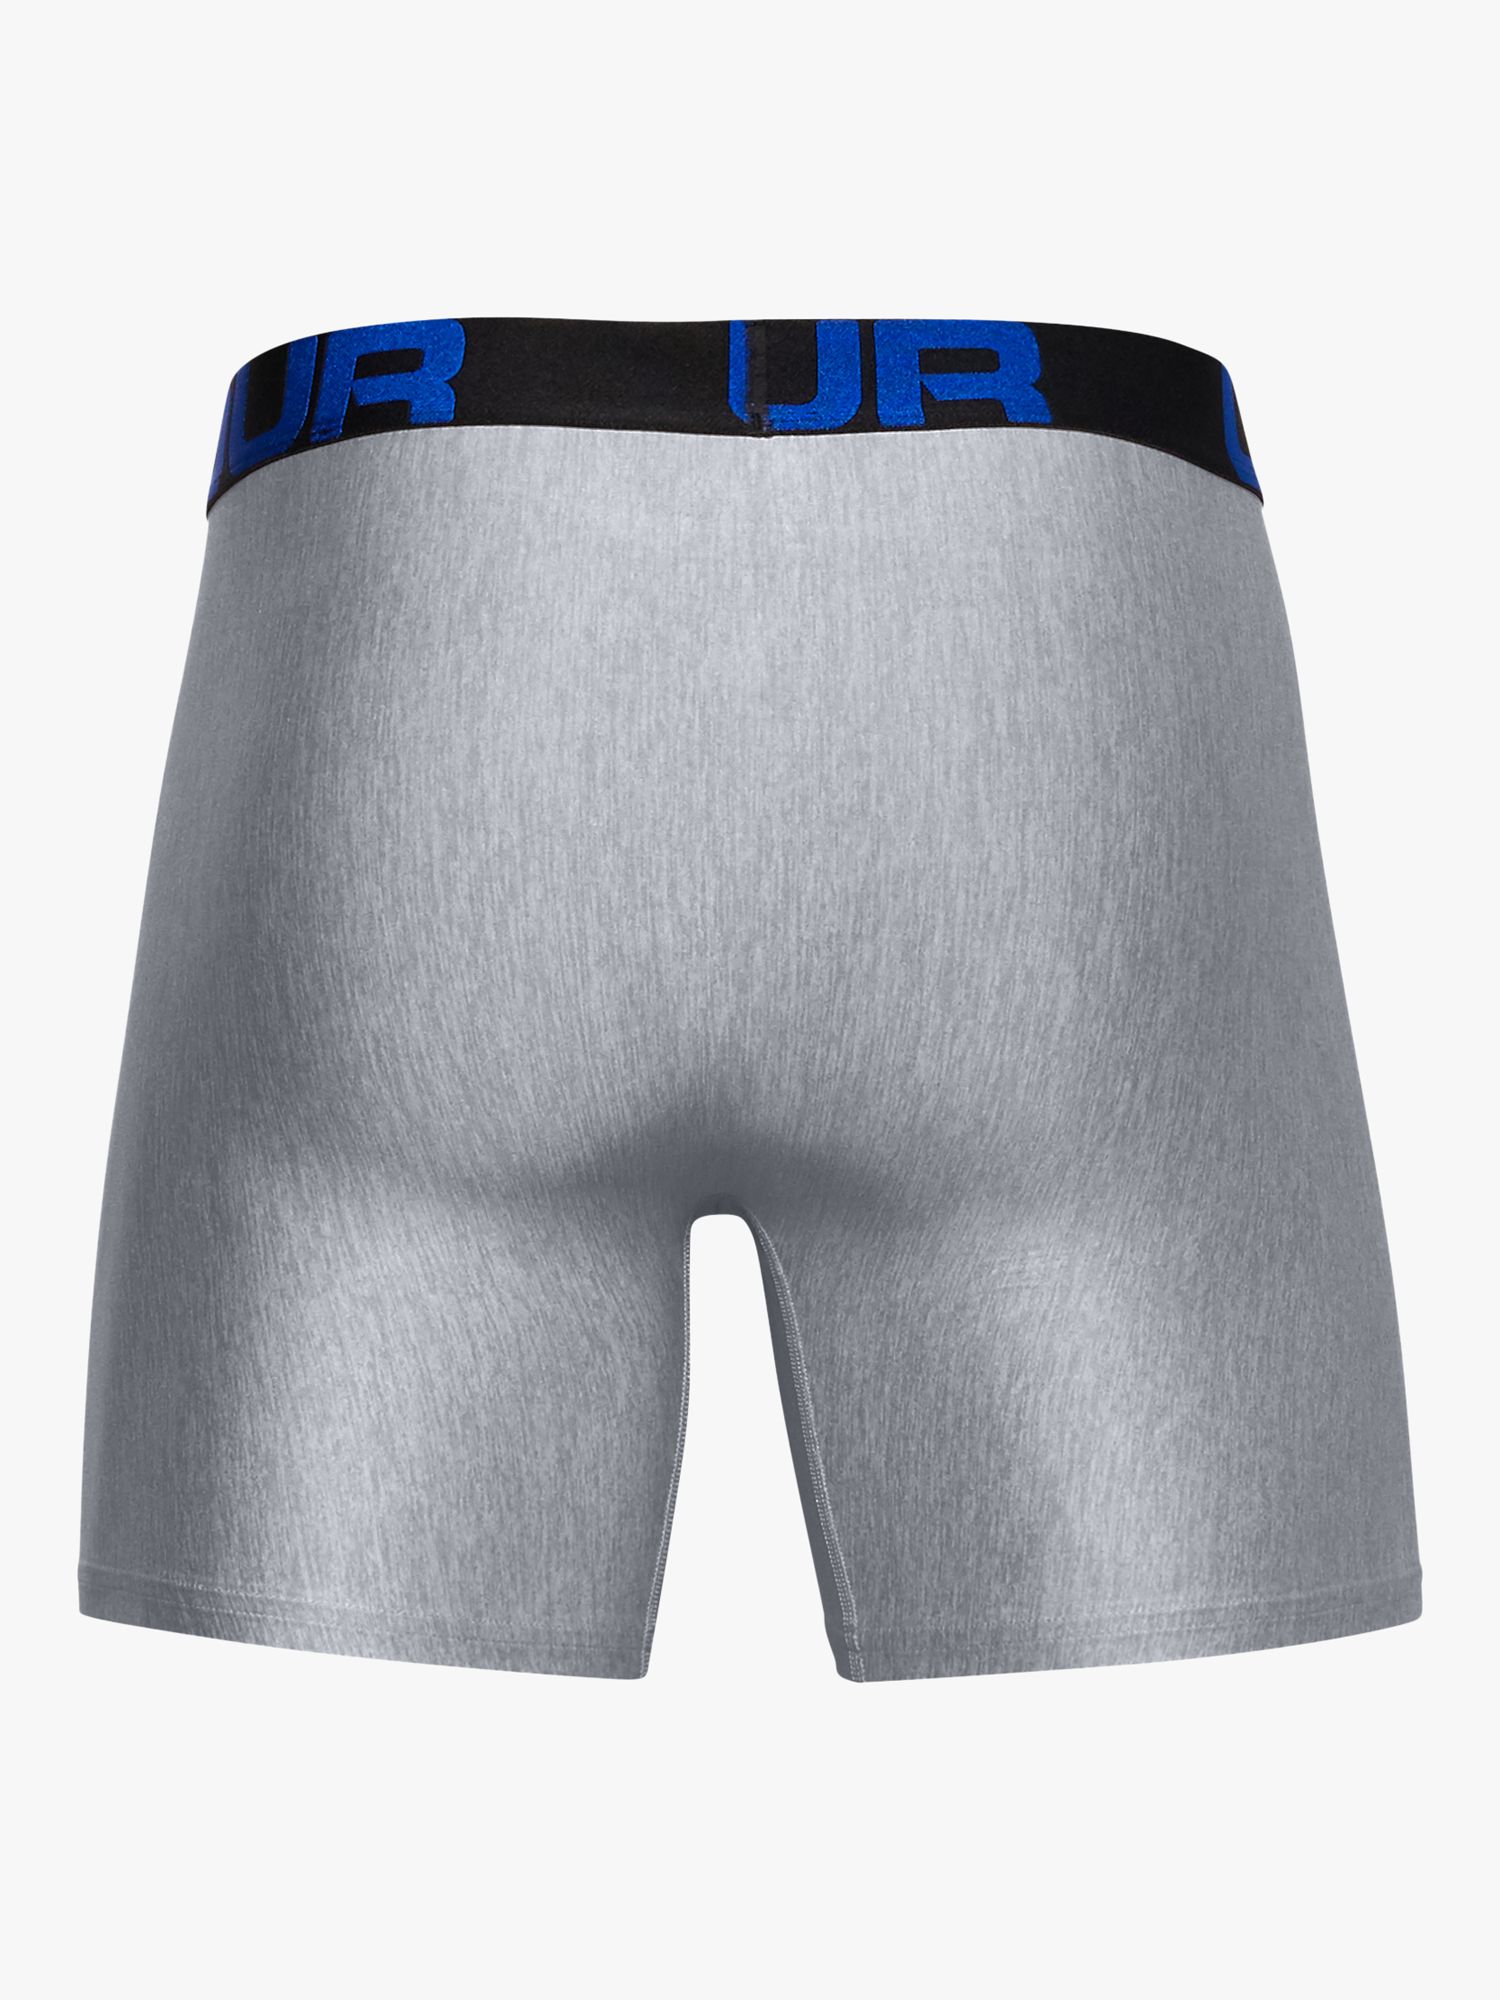 Under Armour Mens Tech Boxerjock 6-inch Multipack : Under Armour:  : Clothing, Shoes & Accessories